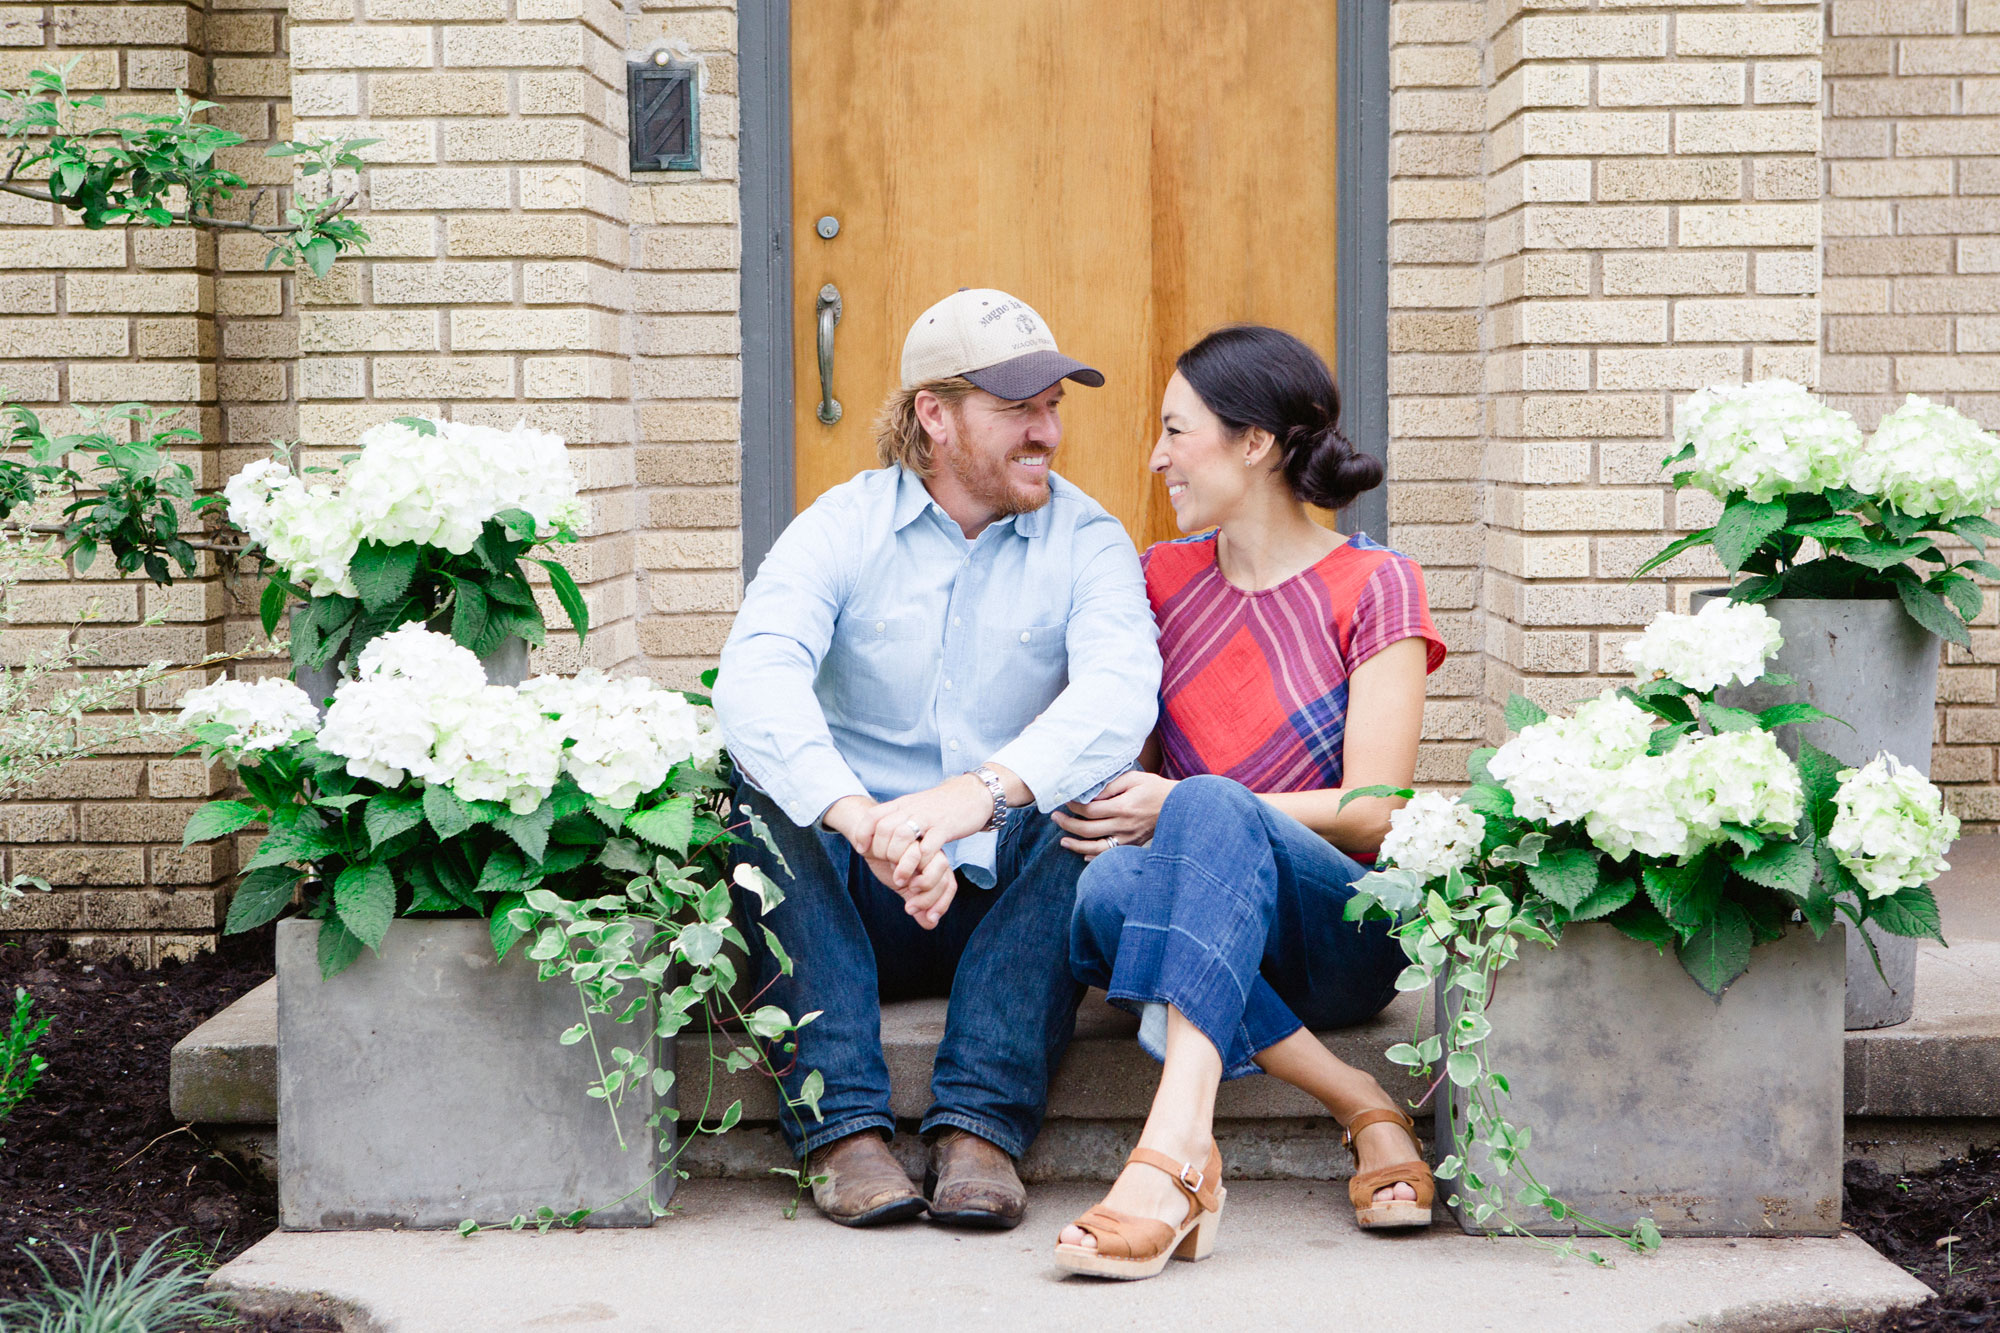 Chip and Joanna Gaines staring into each other's eyes with love.